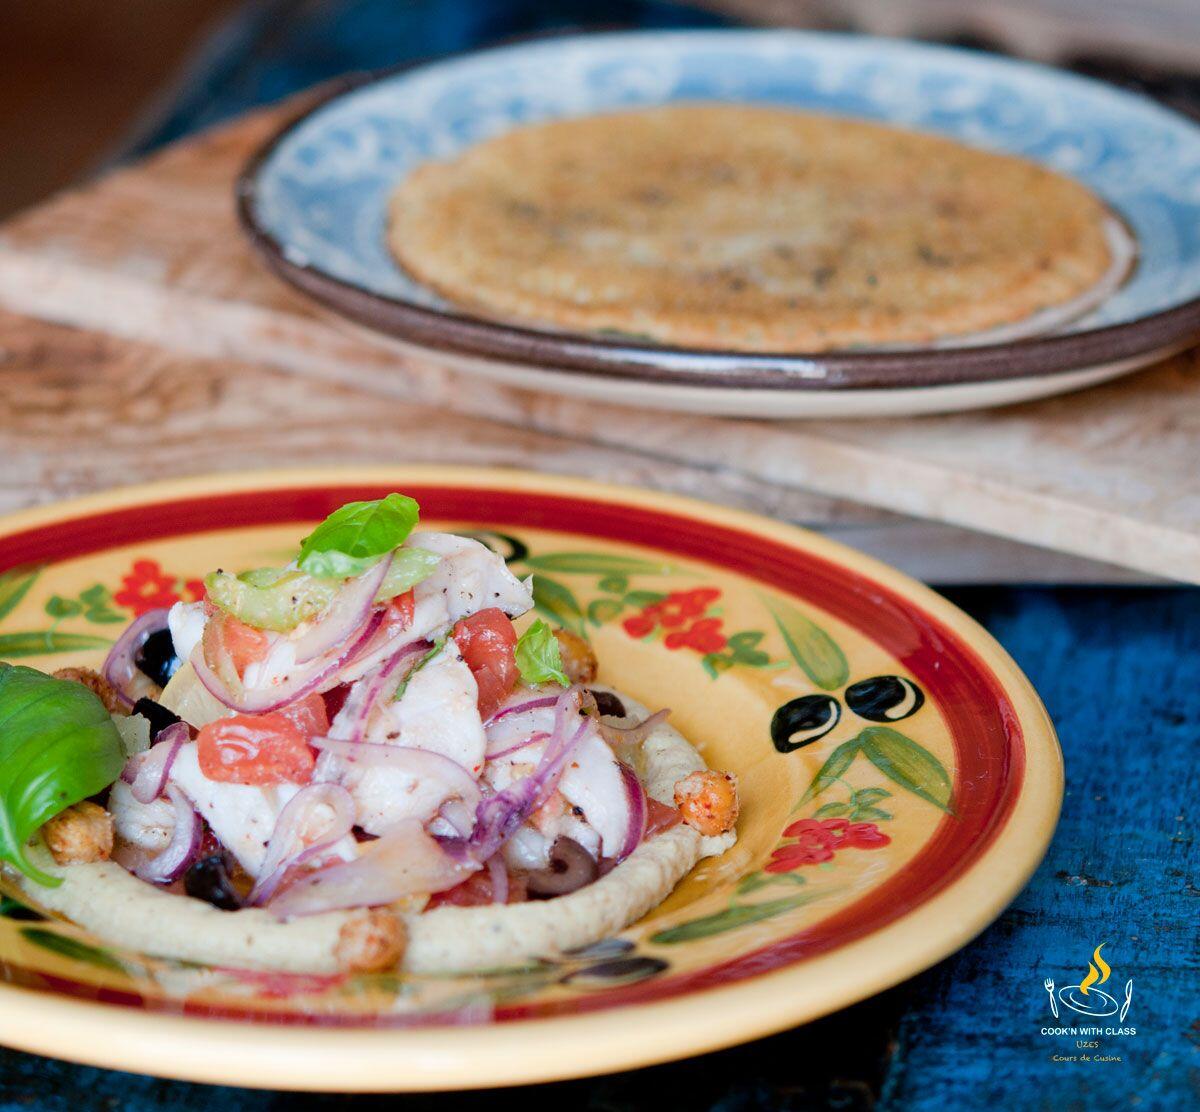 Ceviche Provencal scocca @cooknwithclass